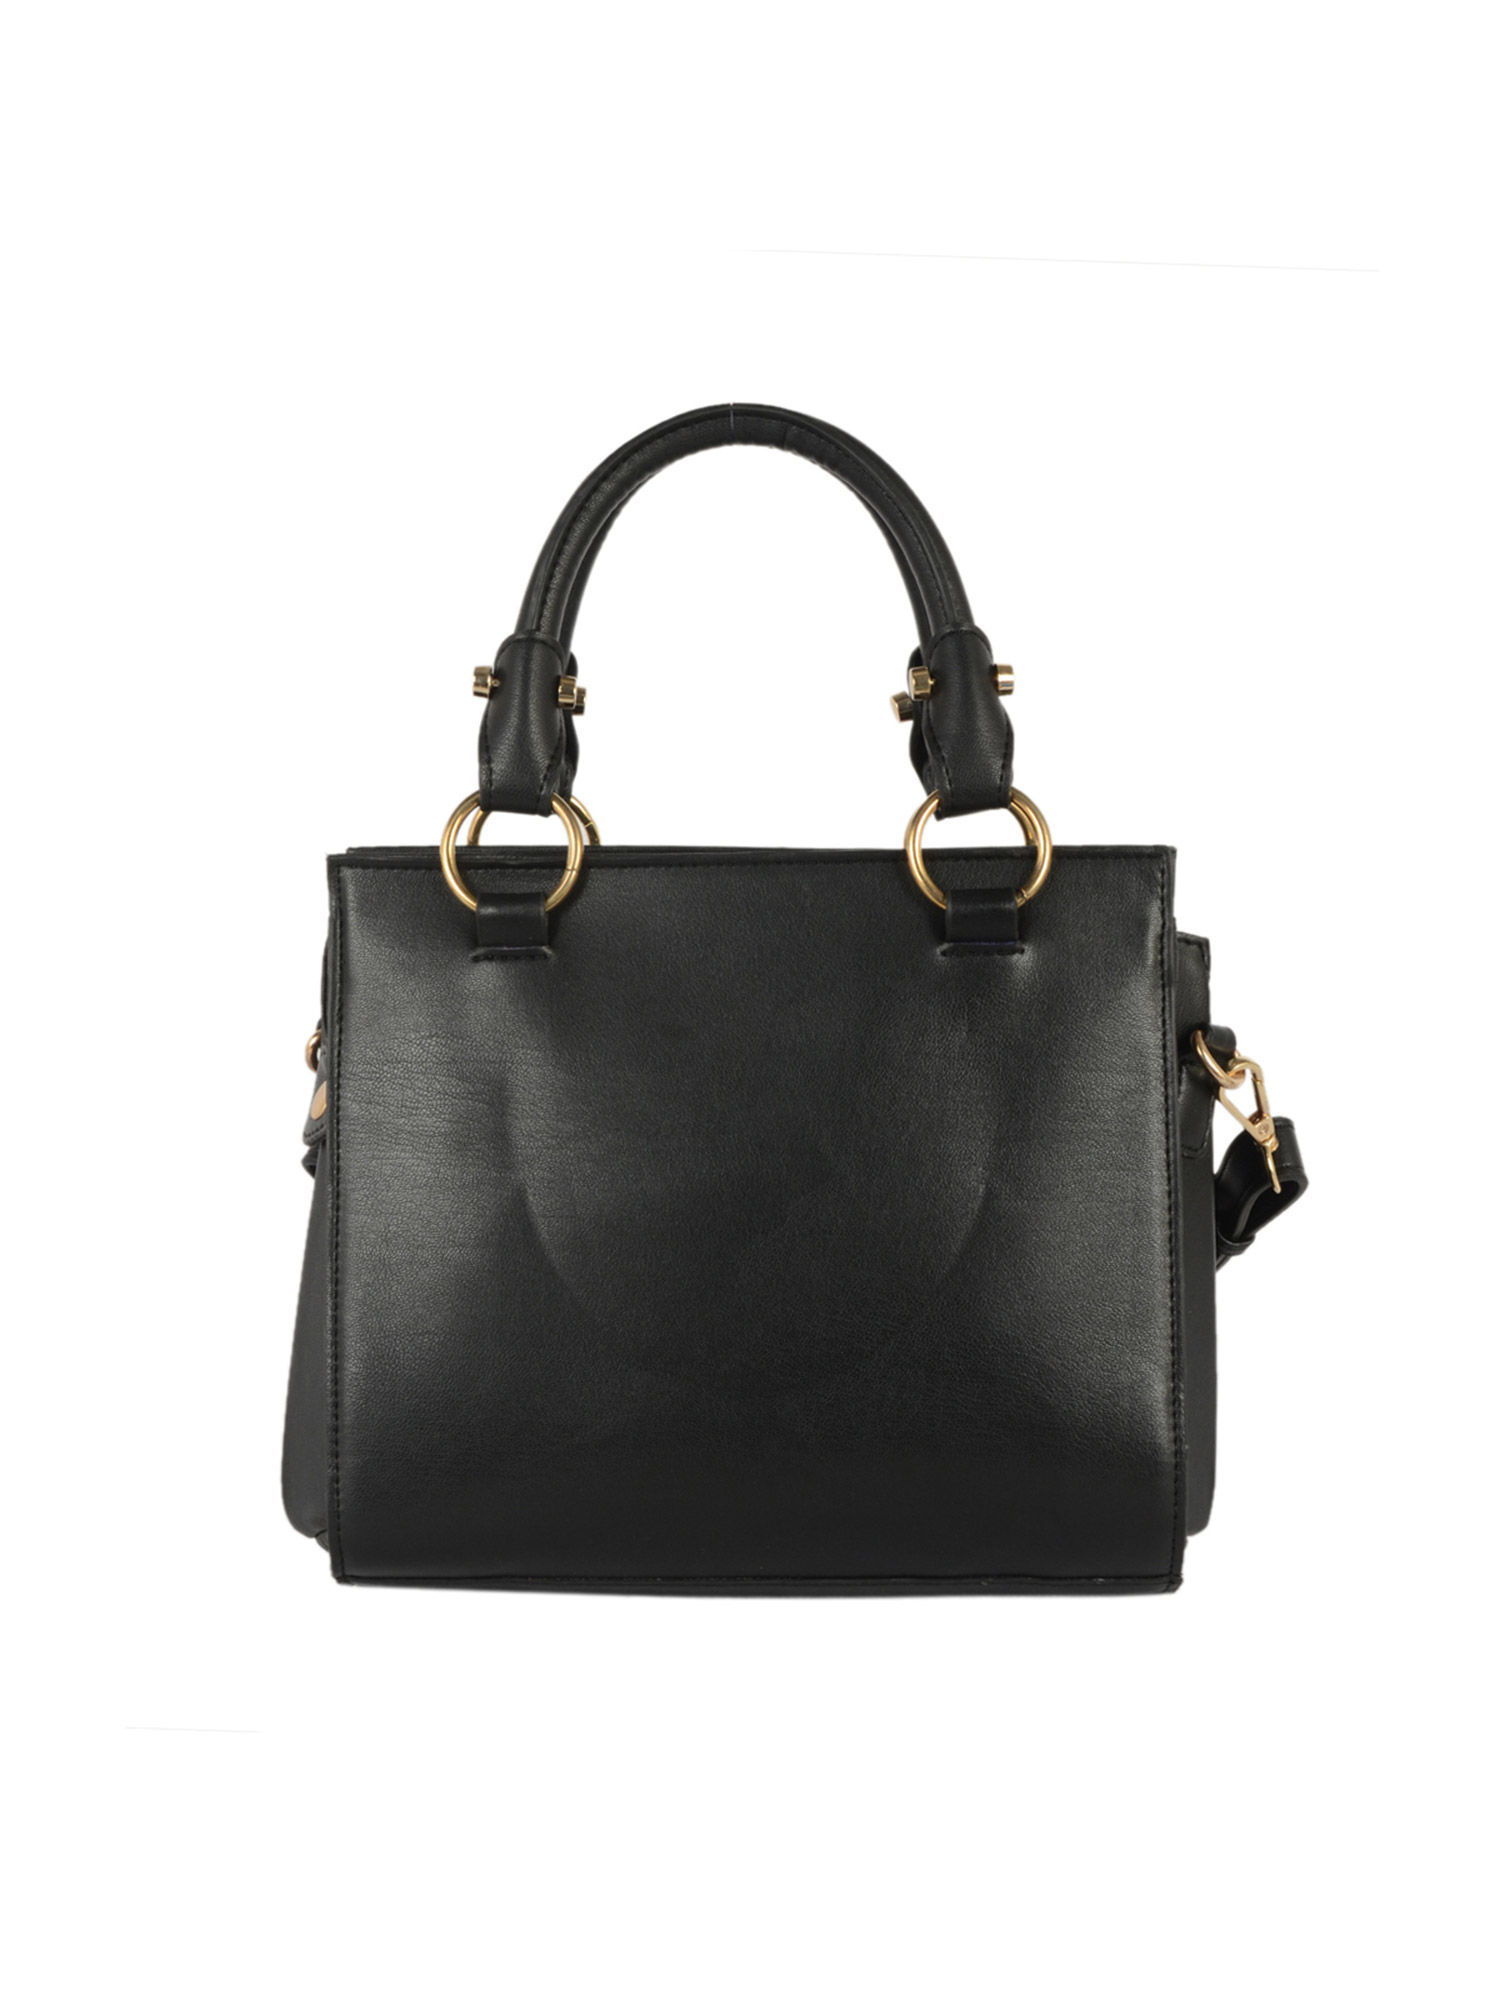 Juicy Couture Black Charm I'm Sure Small Satchel for Women Online India at  Darveys.com